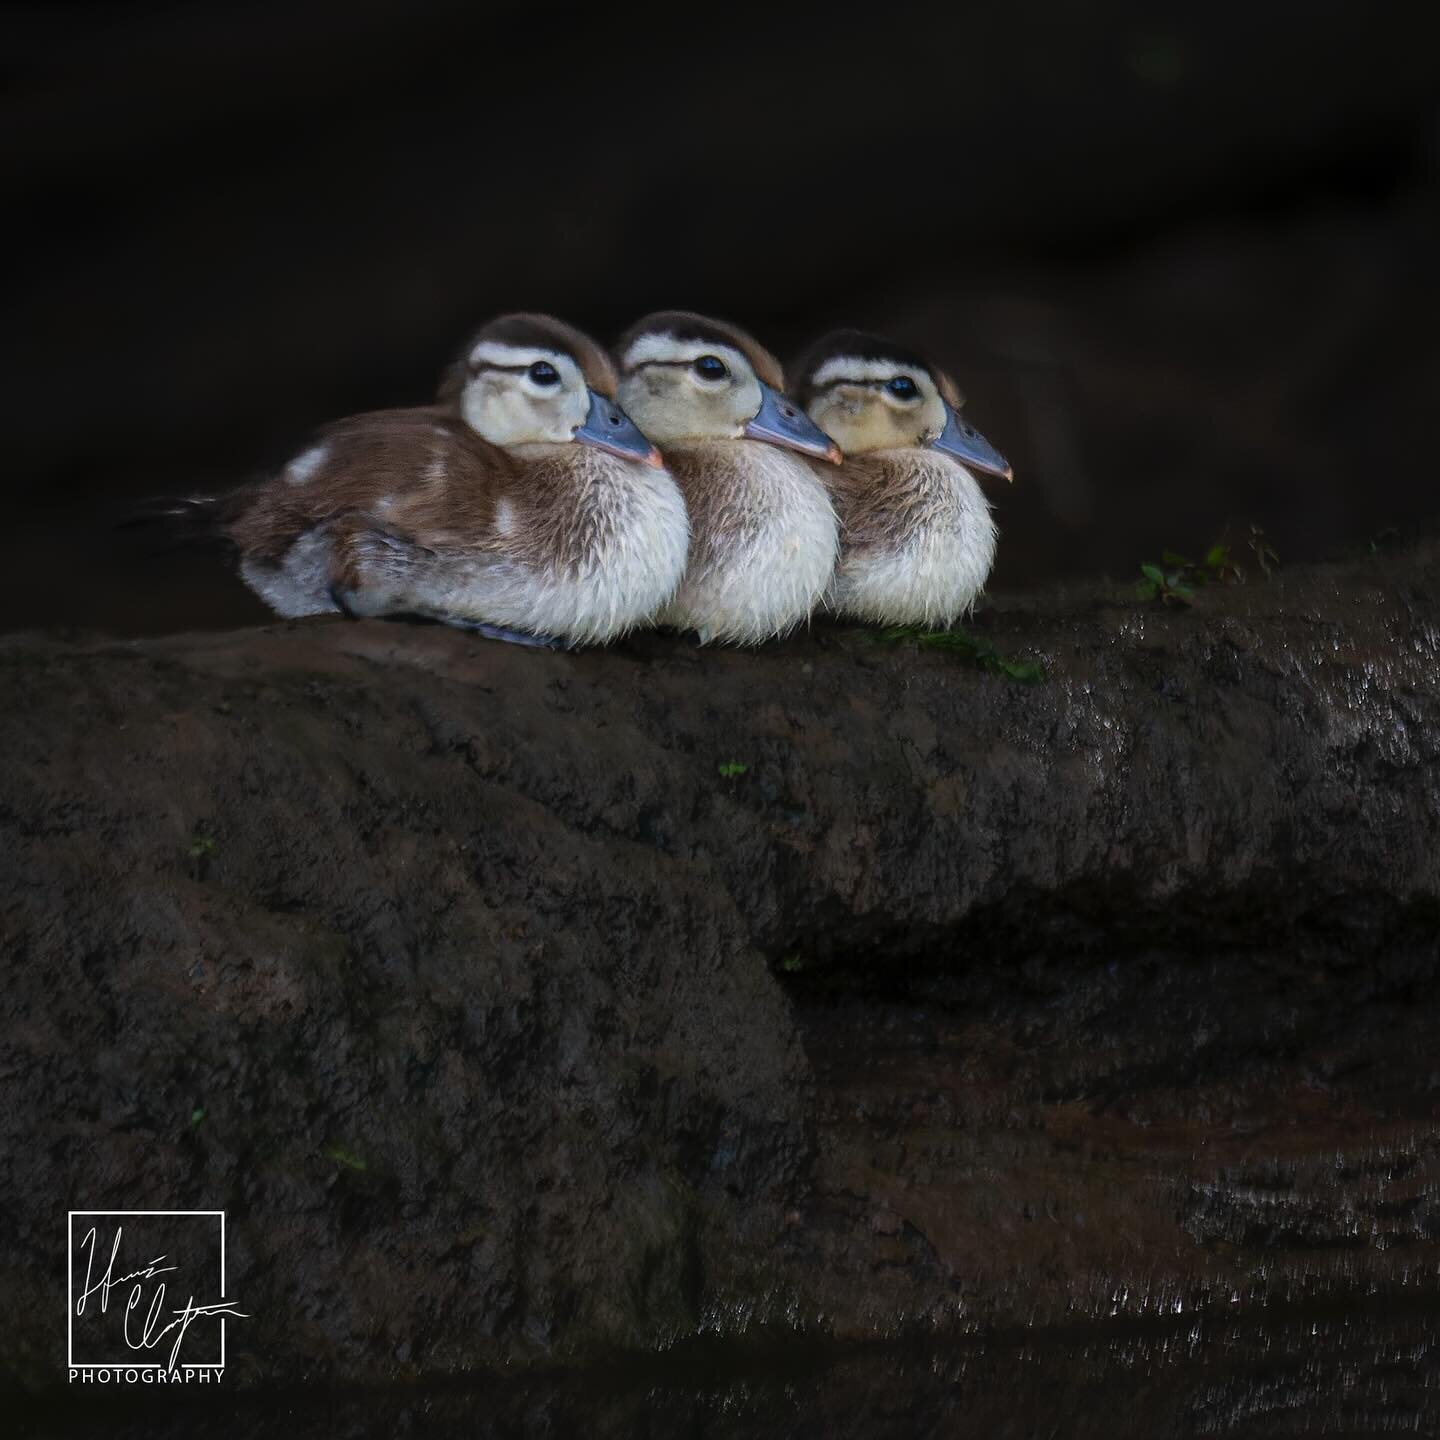 3 baby wood ducks sitting on a log&hellip;

1 mama wood duck, also on a log!

These pictures are of unrelated ducks, but give an example of some of the fun sights you might come across during springtime in the @chattahoocheerivernps 😍

#springtime #